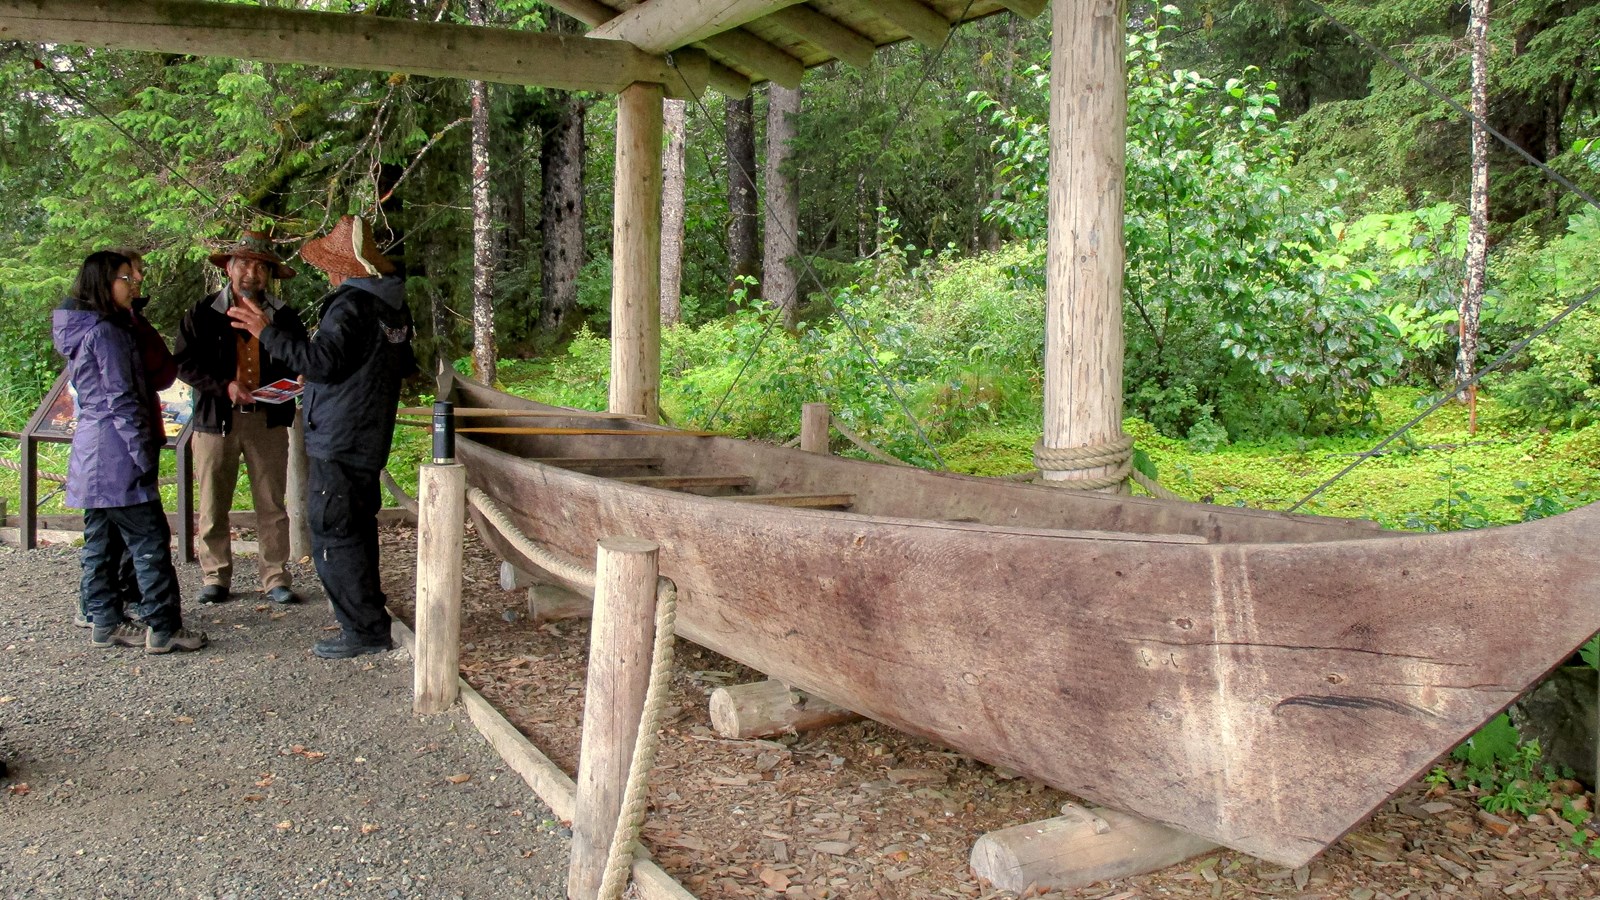 A traditional Tlingit dugout canoe, fashioned from a single log. It sits on display in Bartlett Cove